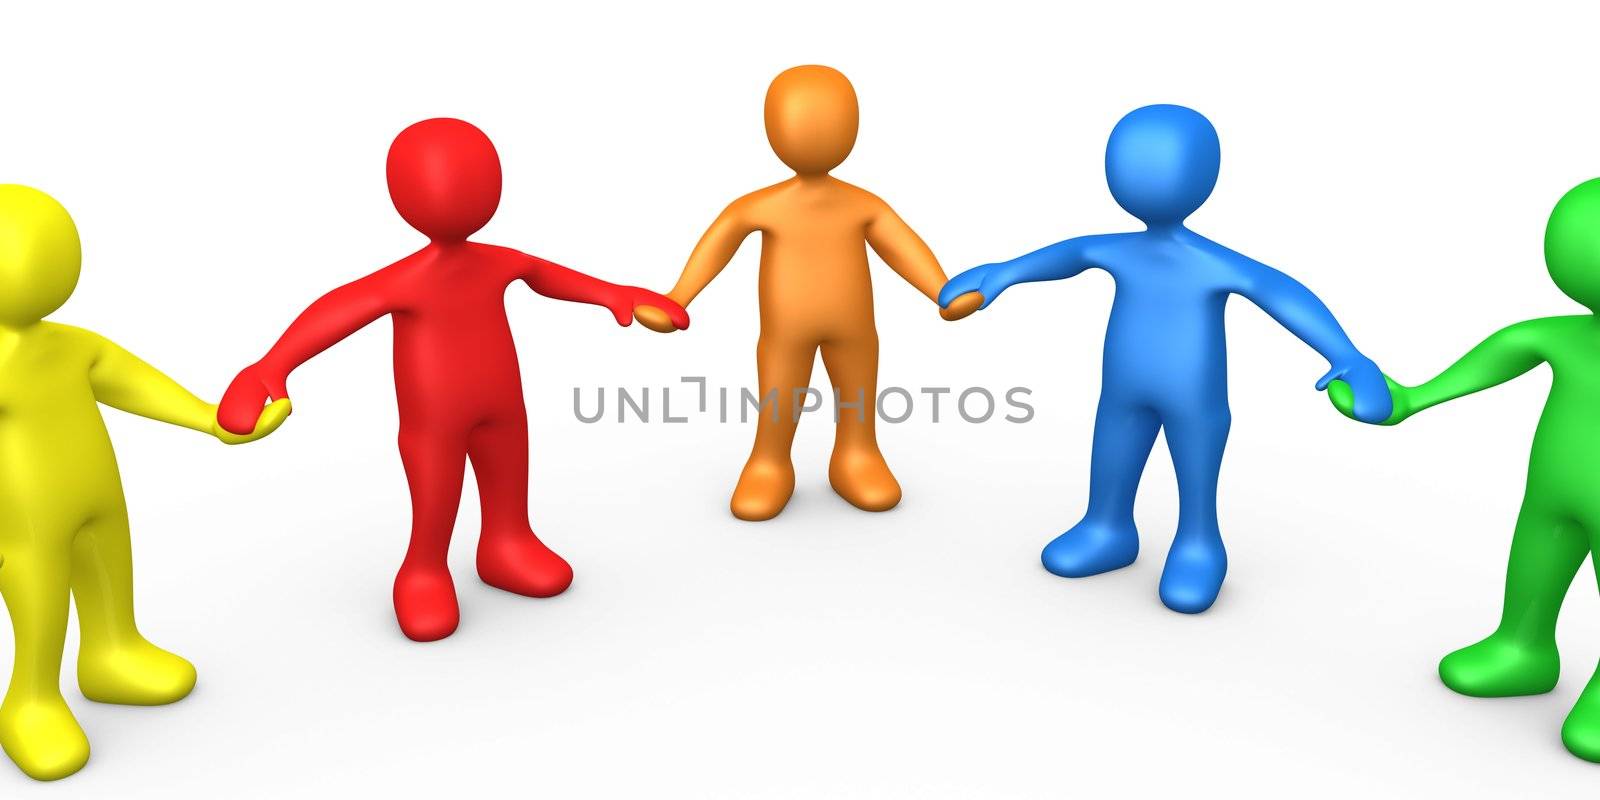 3d People Of Different Colors Holding Hands .